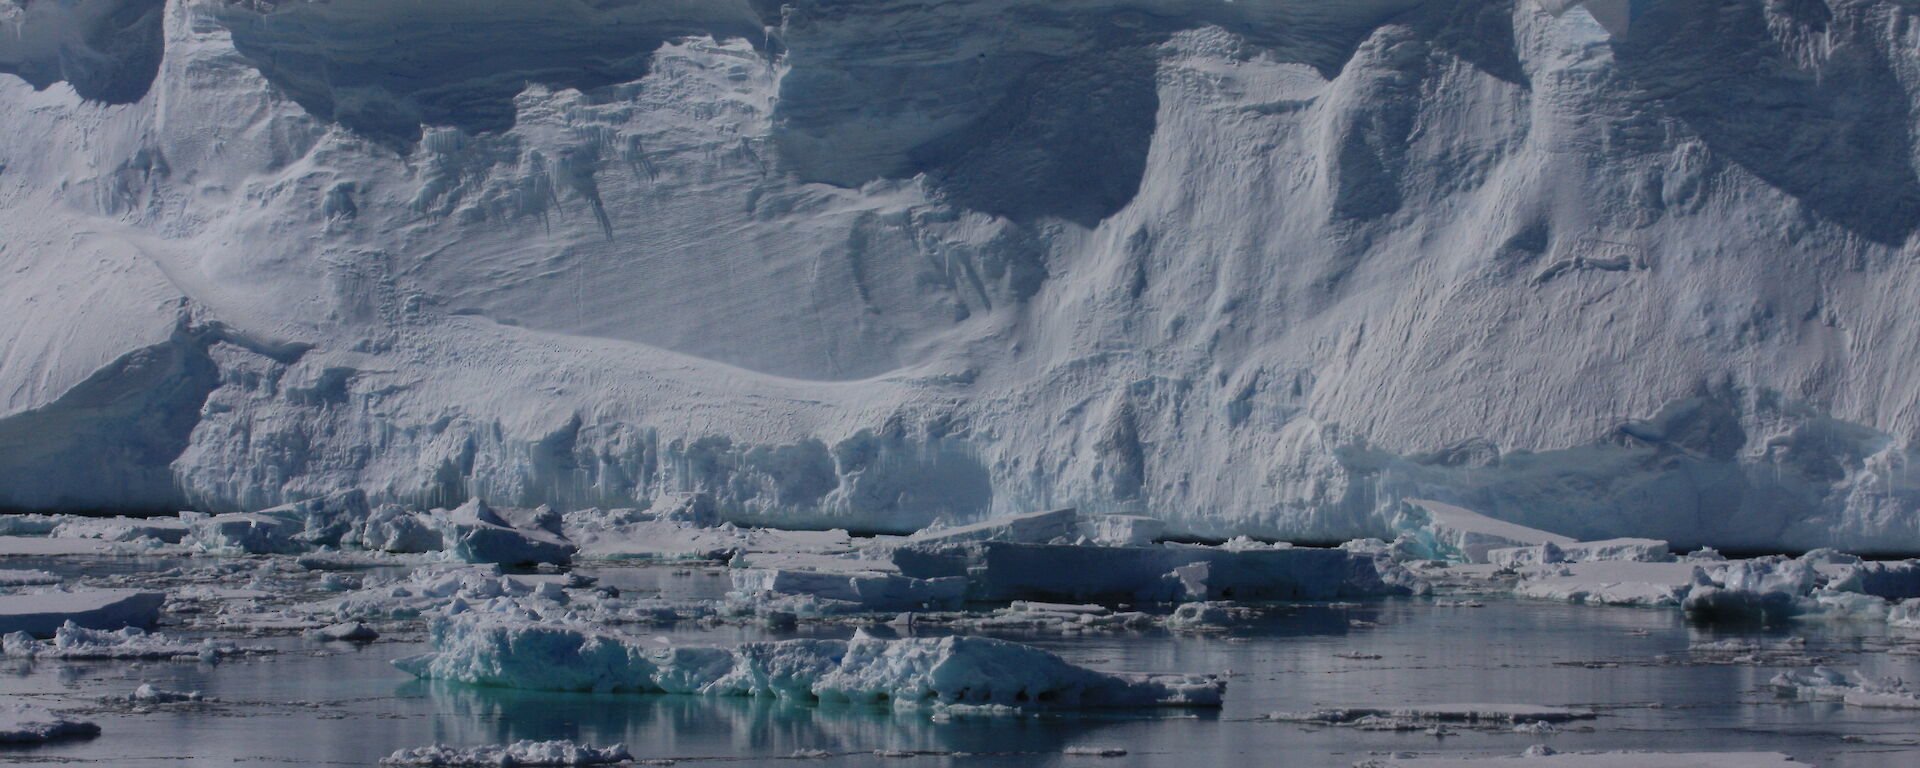 The front of an ice shelf with small bergy bits floating in the ocean in front.